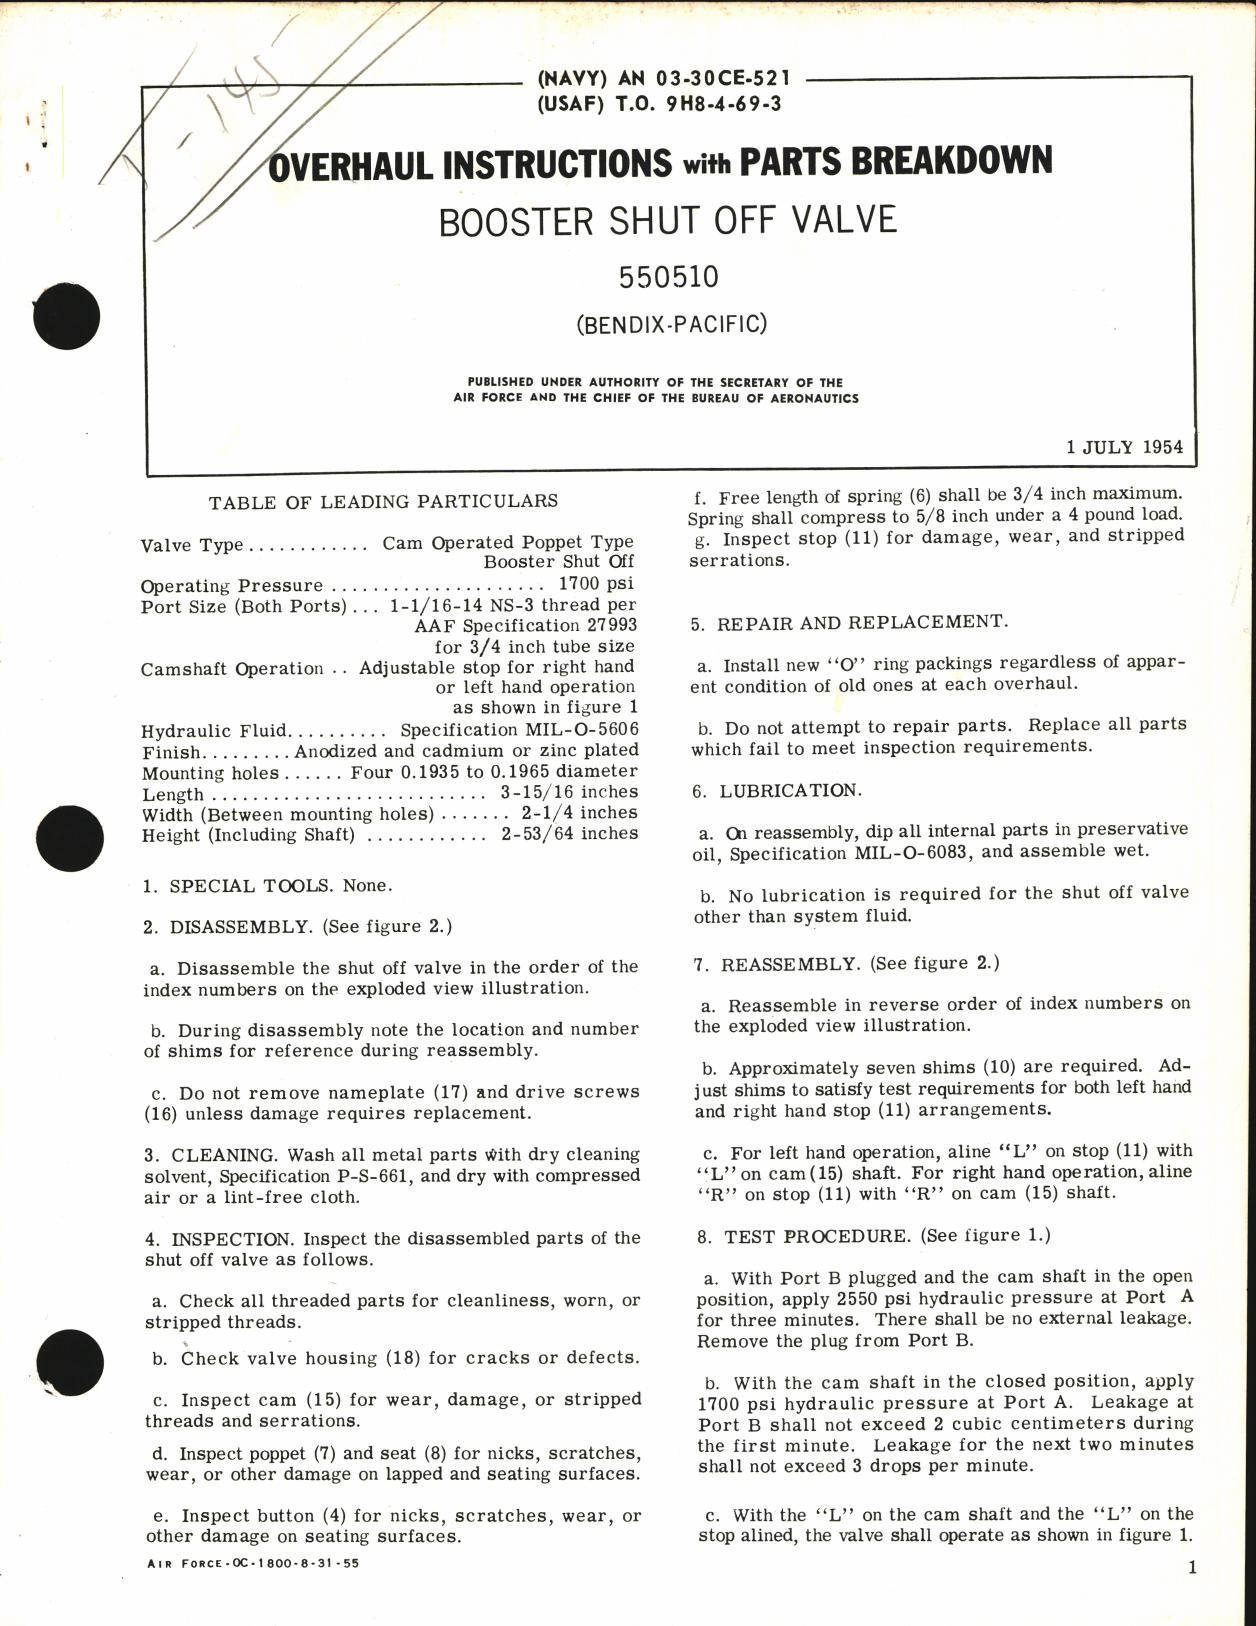 Sample page 1 from AirCorps Library document: Overhaul Instructions with Parts Breakdown for Booster Shut off Valve 550510